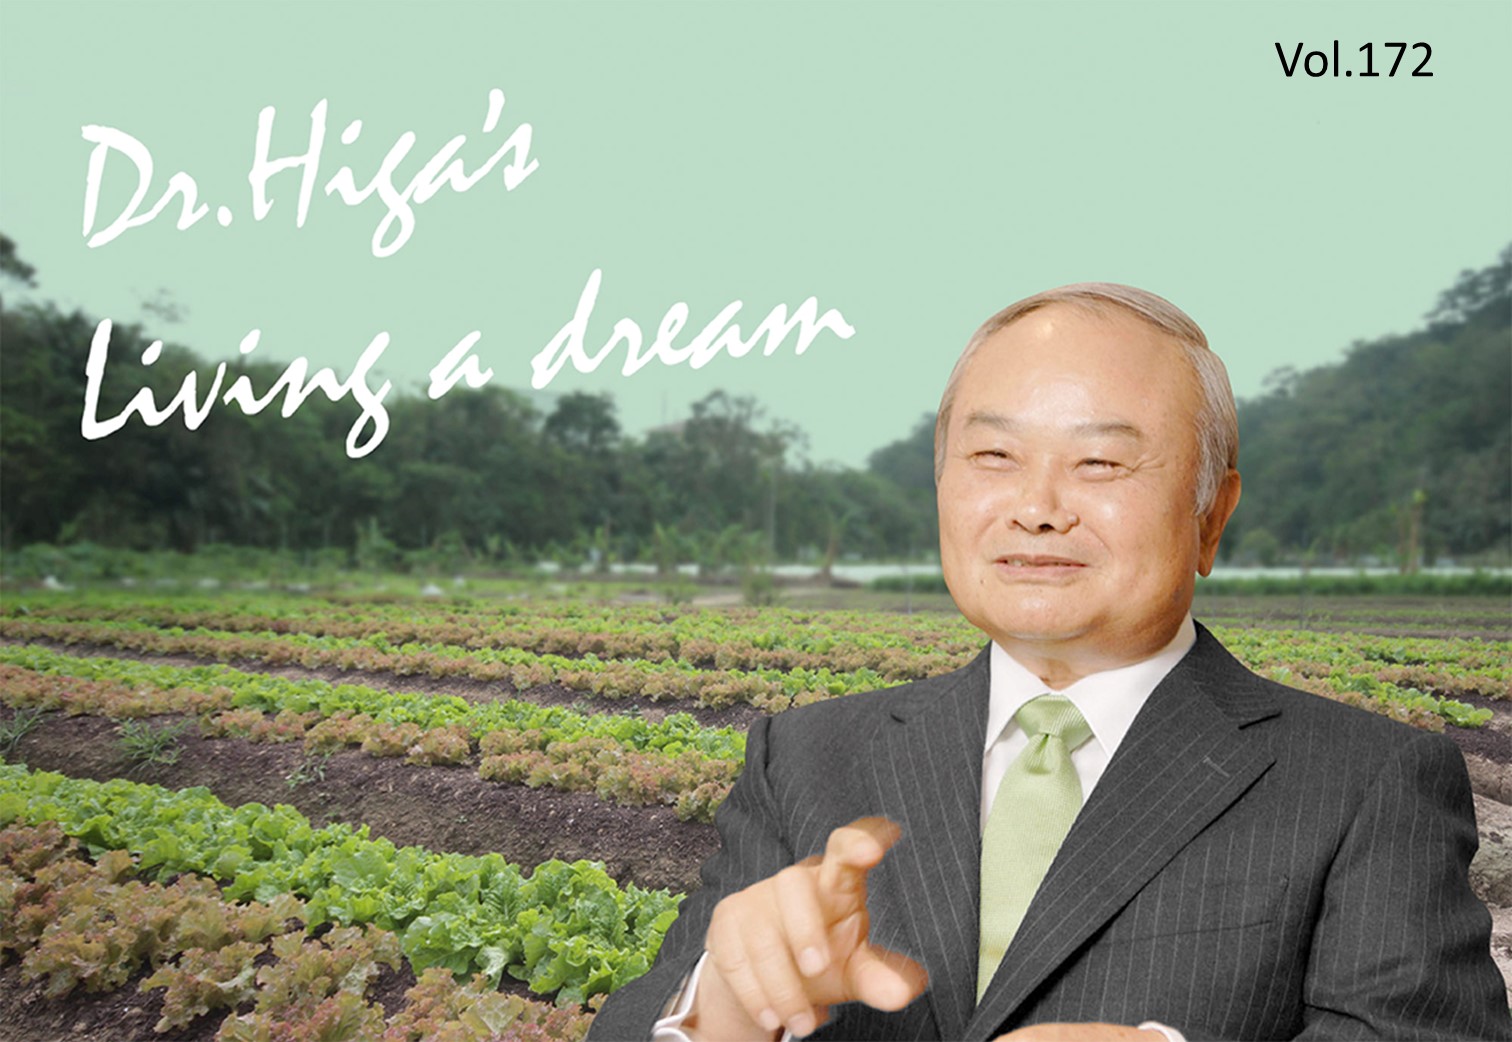 Dr. Higa's "Living a Dream": the latest article #172 is up!!!